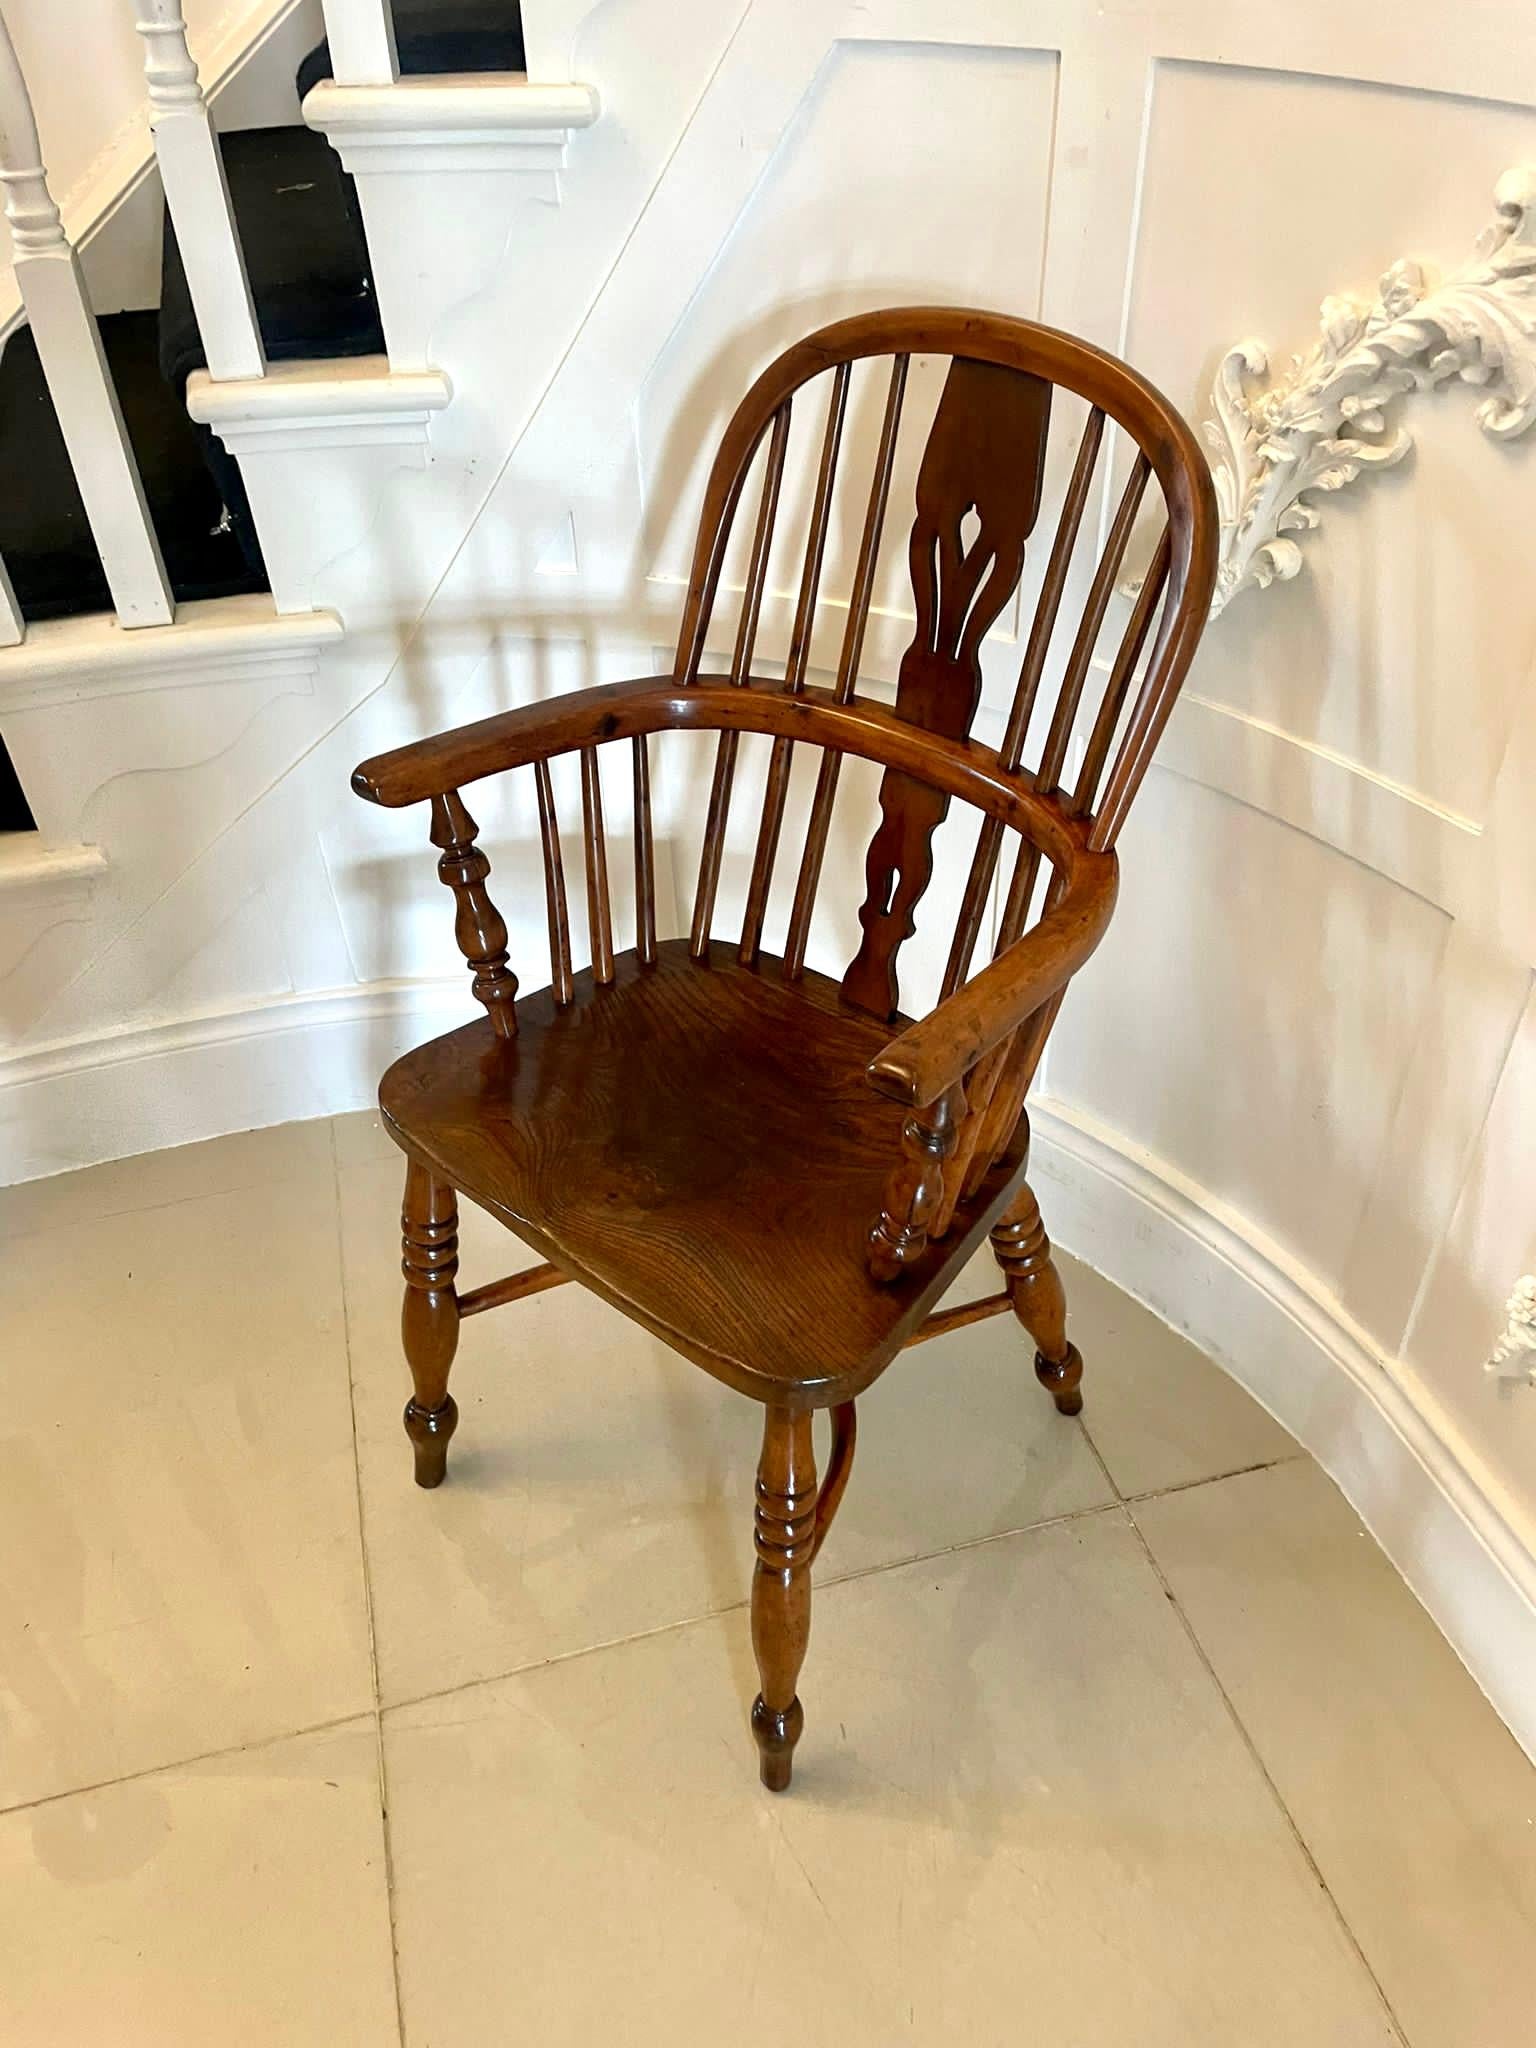 Antique George III quality yew wood Windsor armchair having a yew wood shaped back, turned spindles, shaped splat, elm seat standing on turned legs united by a yew wood crinoline stretcher


A wonderful example in lovely original